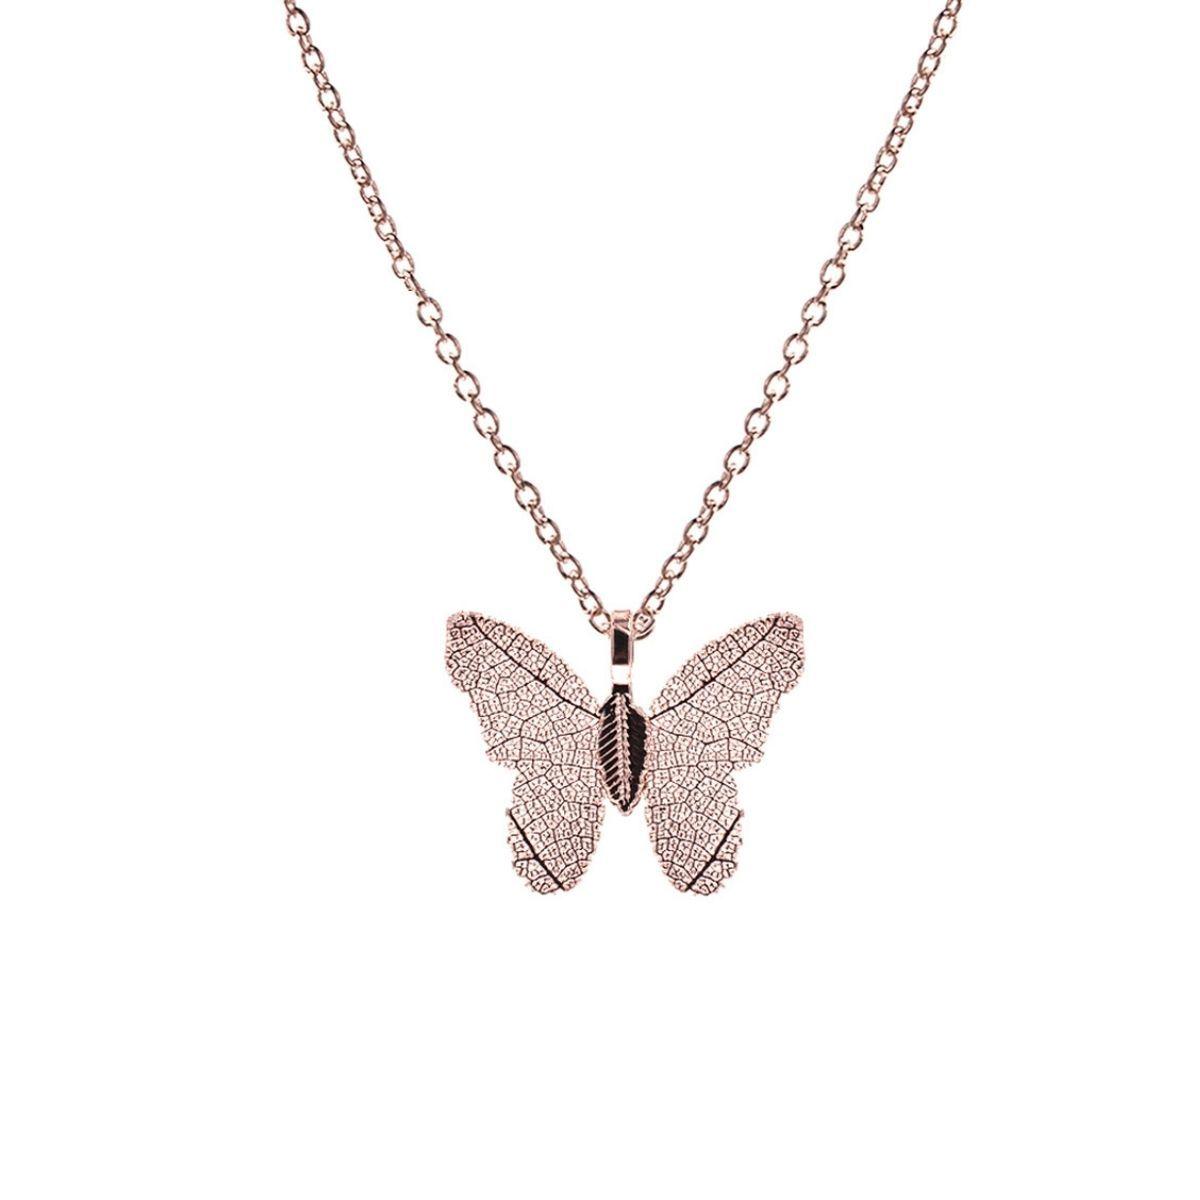 Get your wings with our Rose Gold-tone Butterfly Necklace - Shop now!